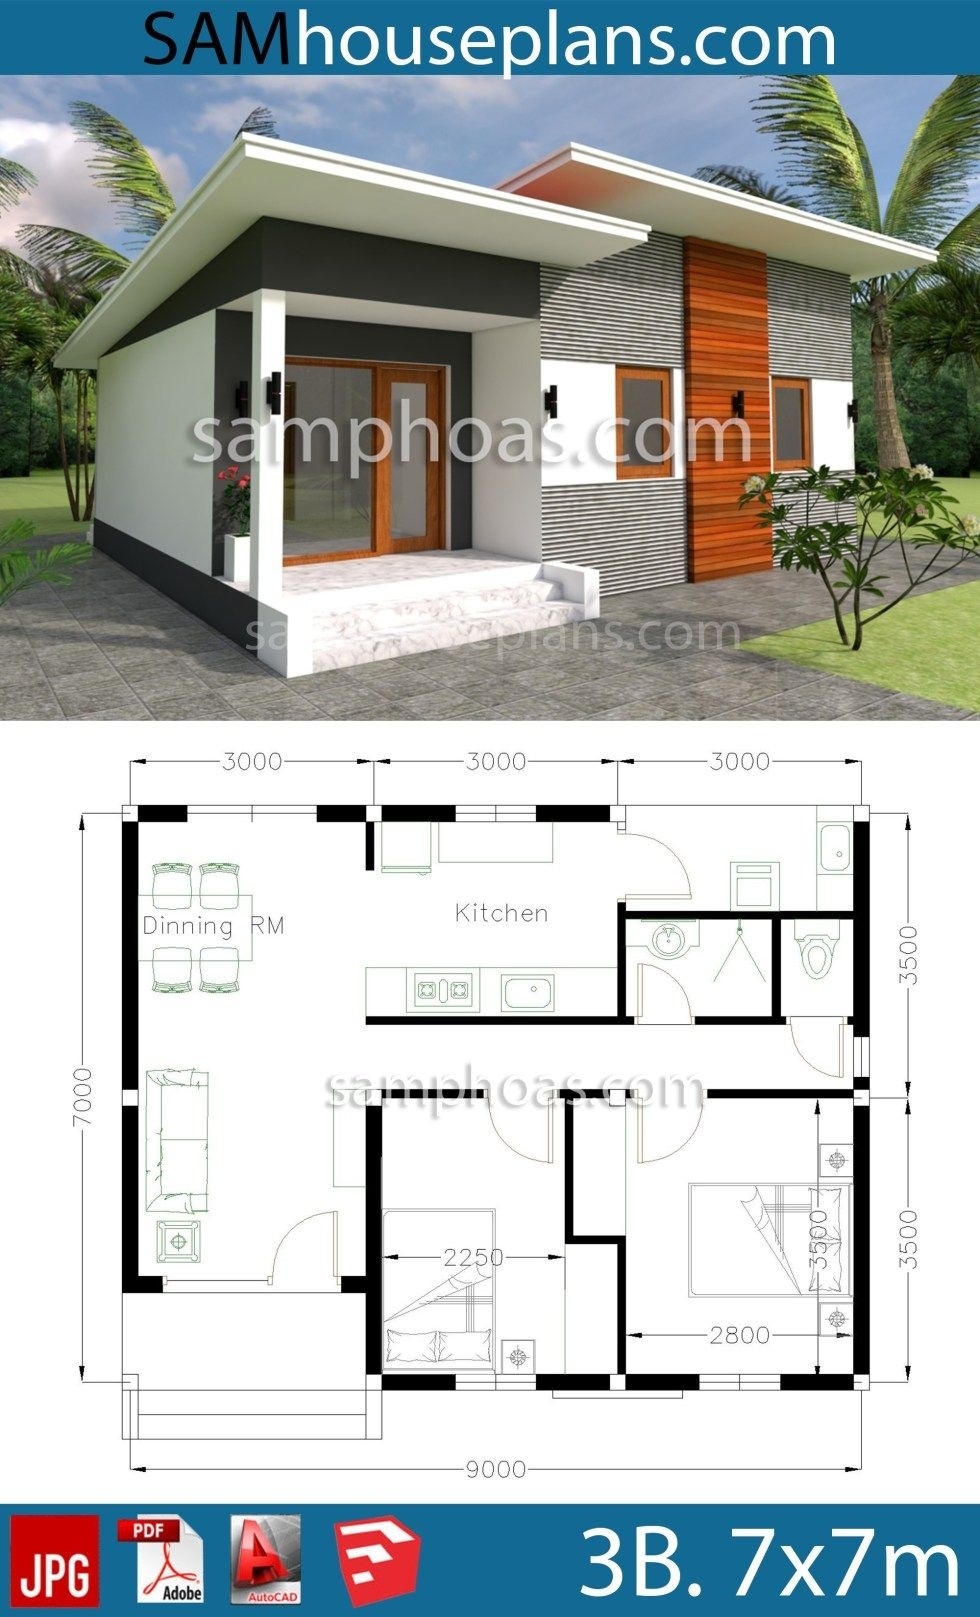 Most inspiring house plans 9x7m with 2 bedrooms sam house plans | house roof design regarding 2 bedroom house plans